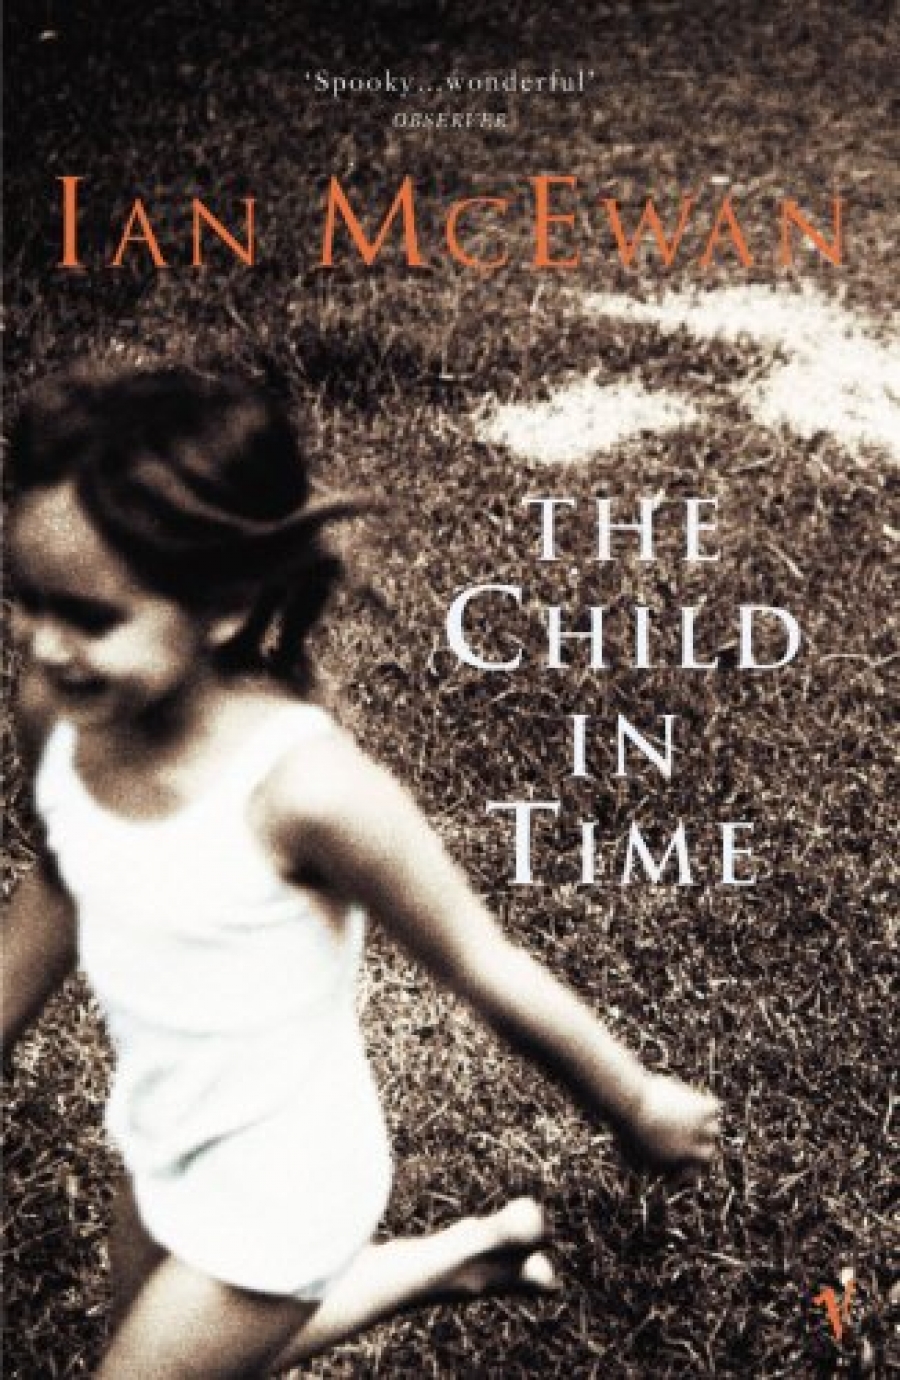 Ian M. Child in Time 